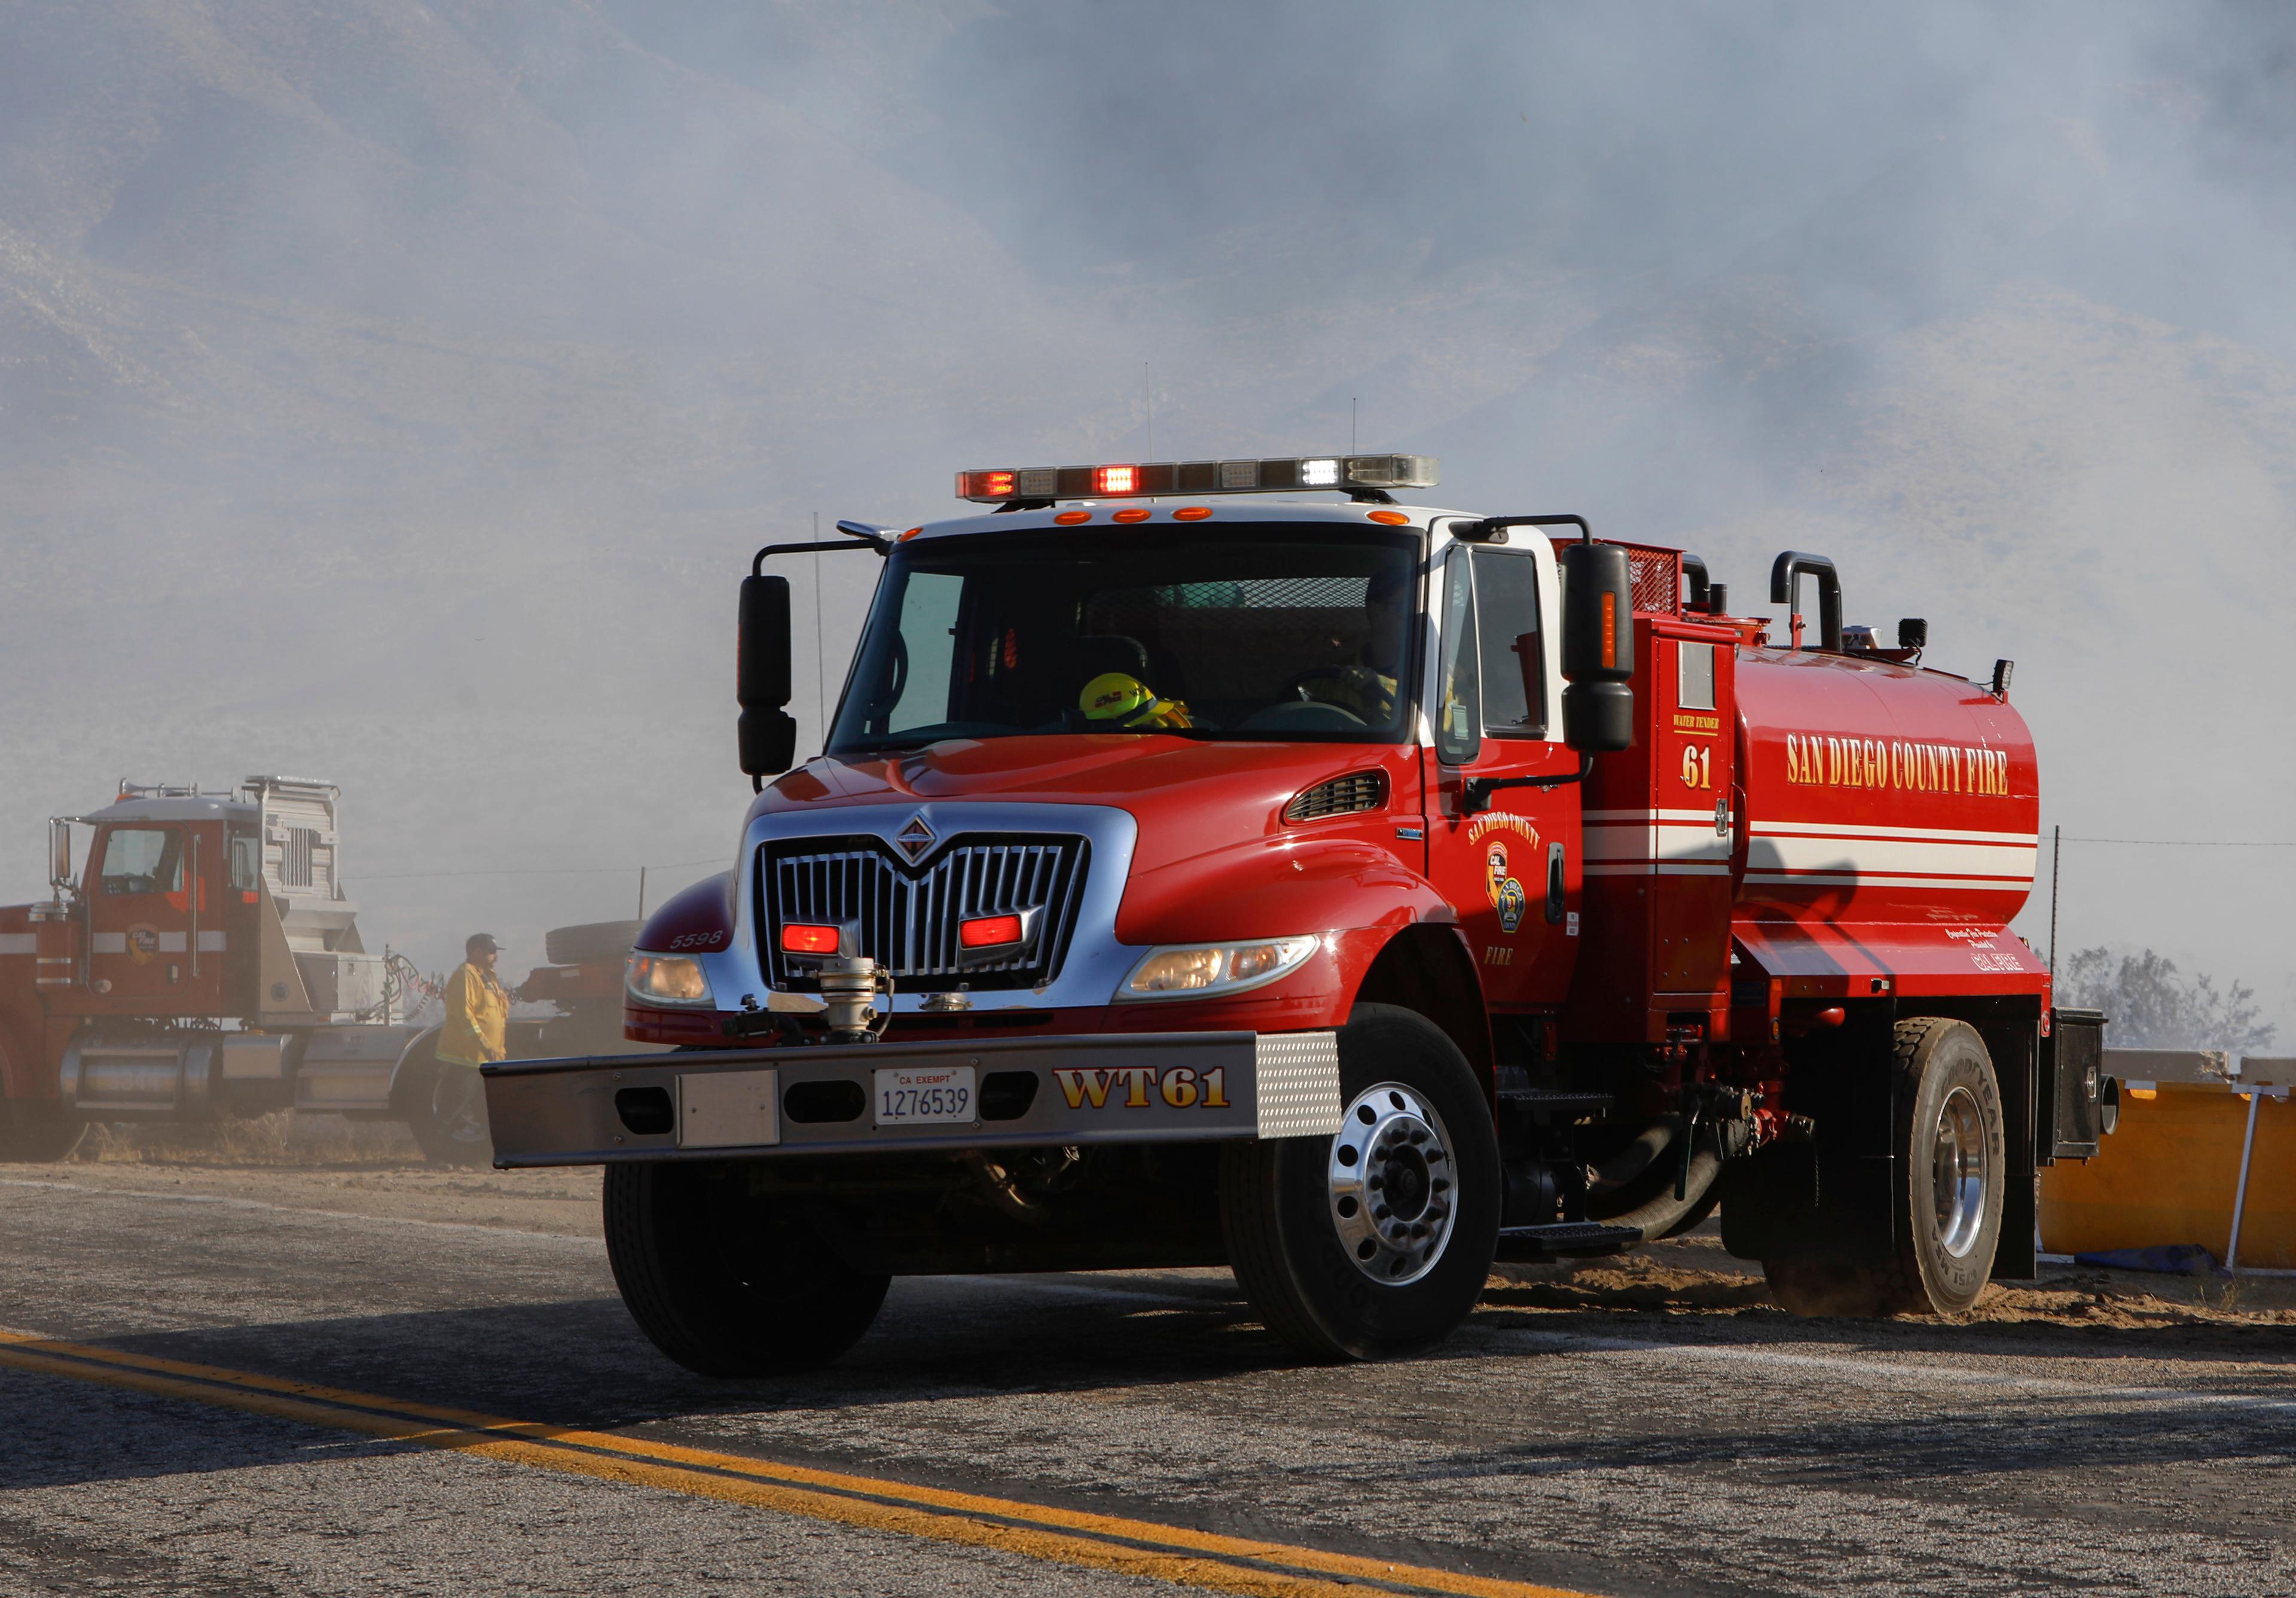 Firefighters Battle Large Wildfire Across US-Mexico Border